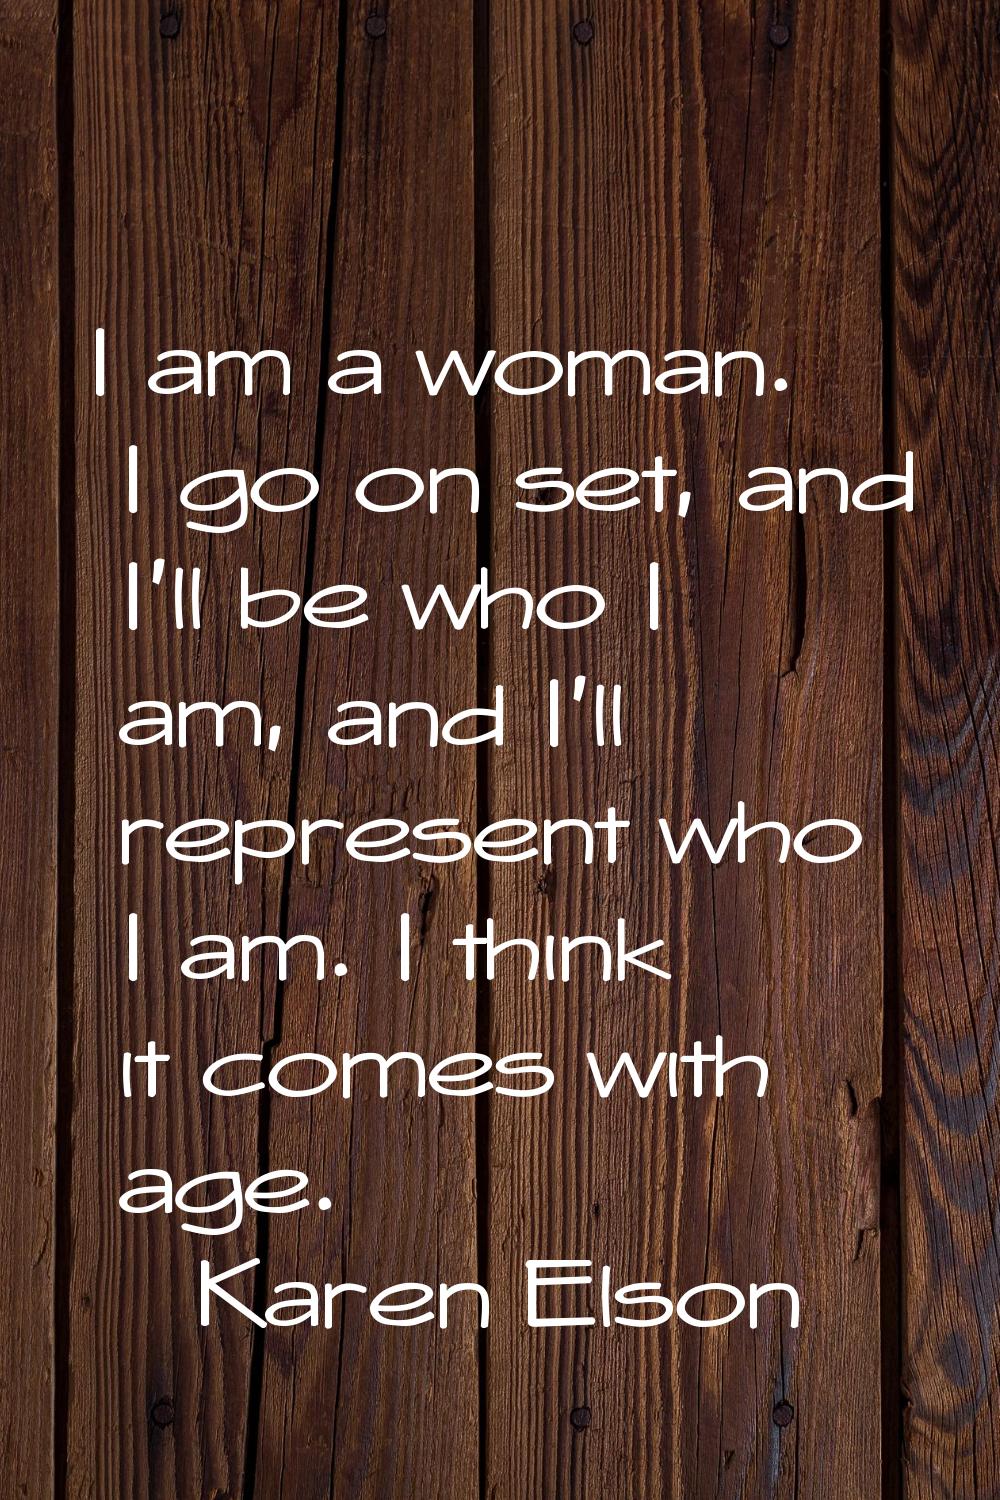 I am a woman. I go on set, and I'll be who I am, and I'll represent who I am. I think it comes with